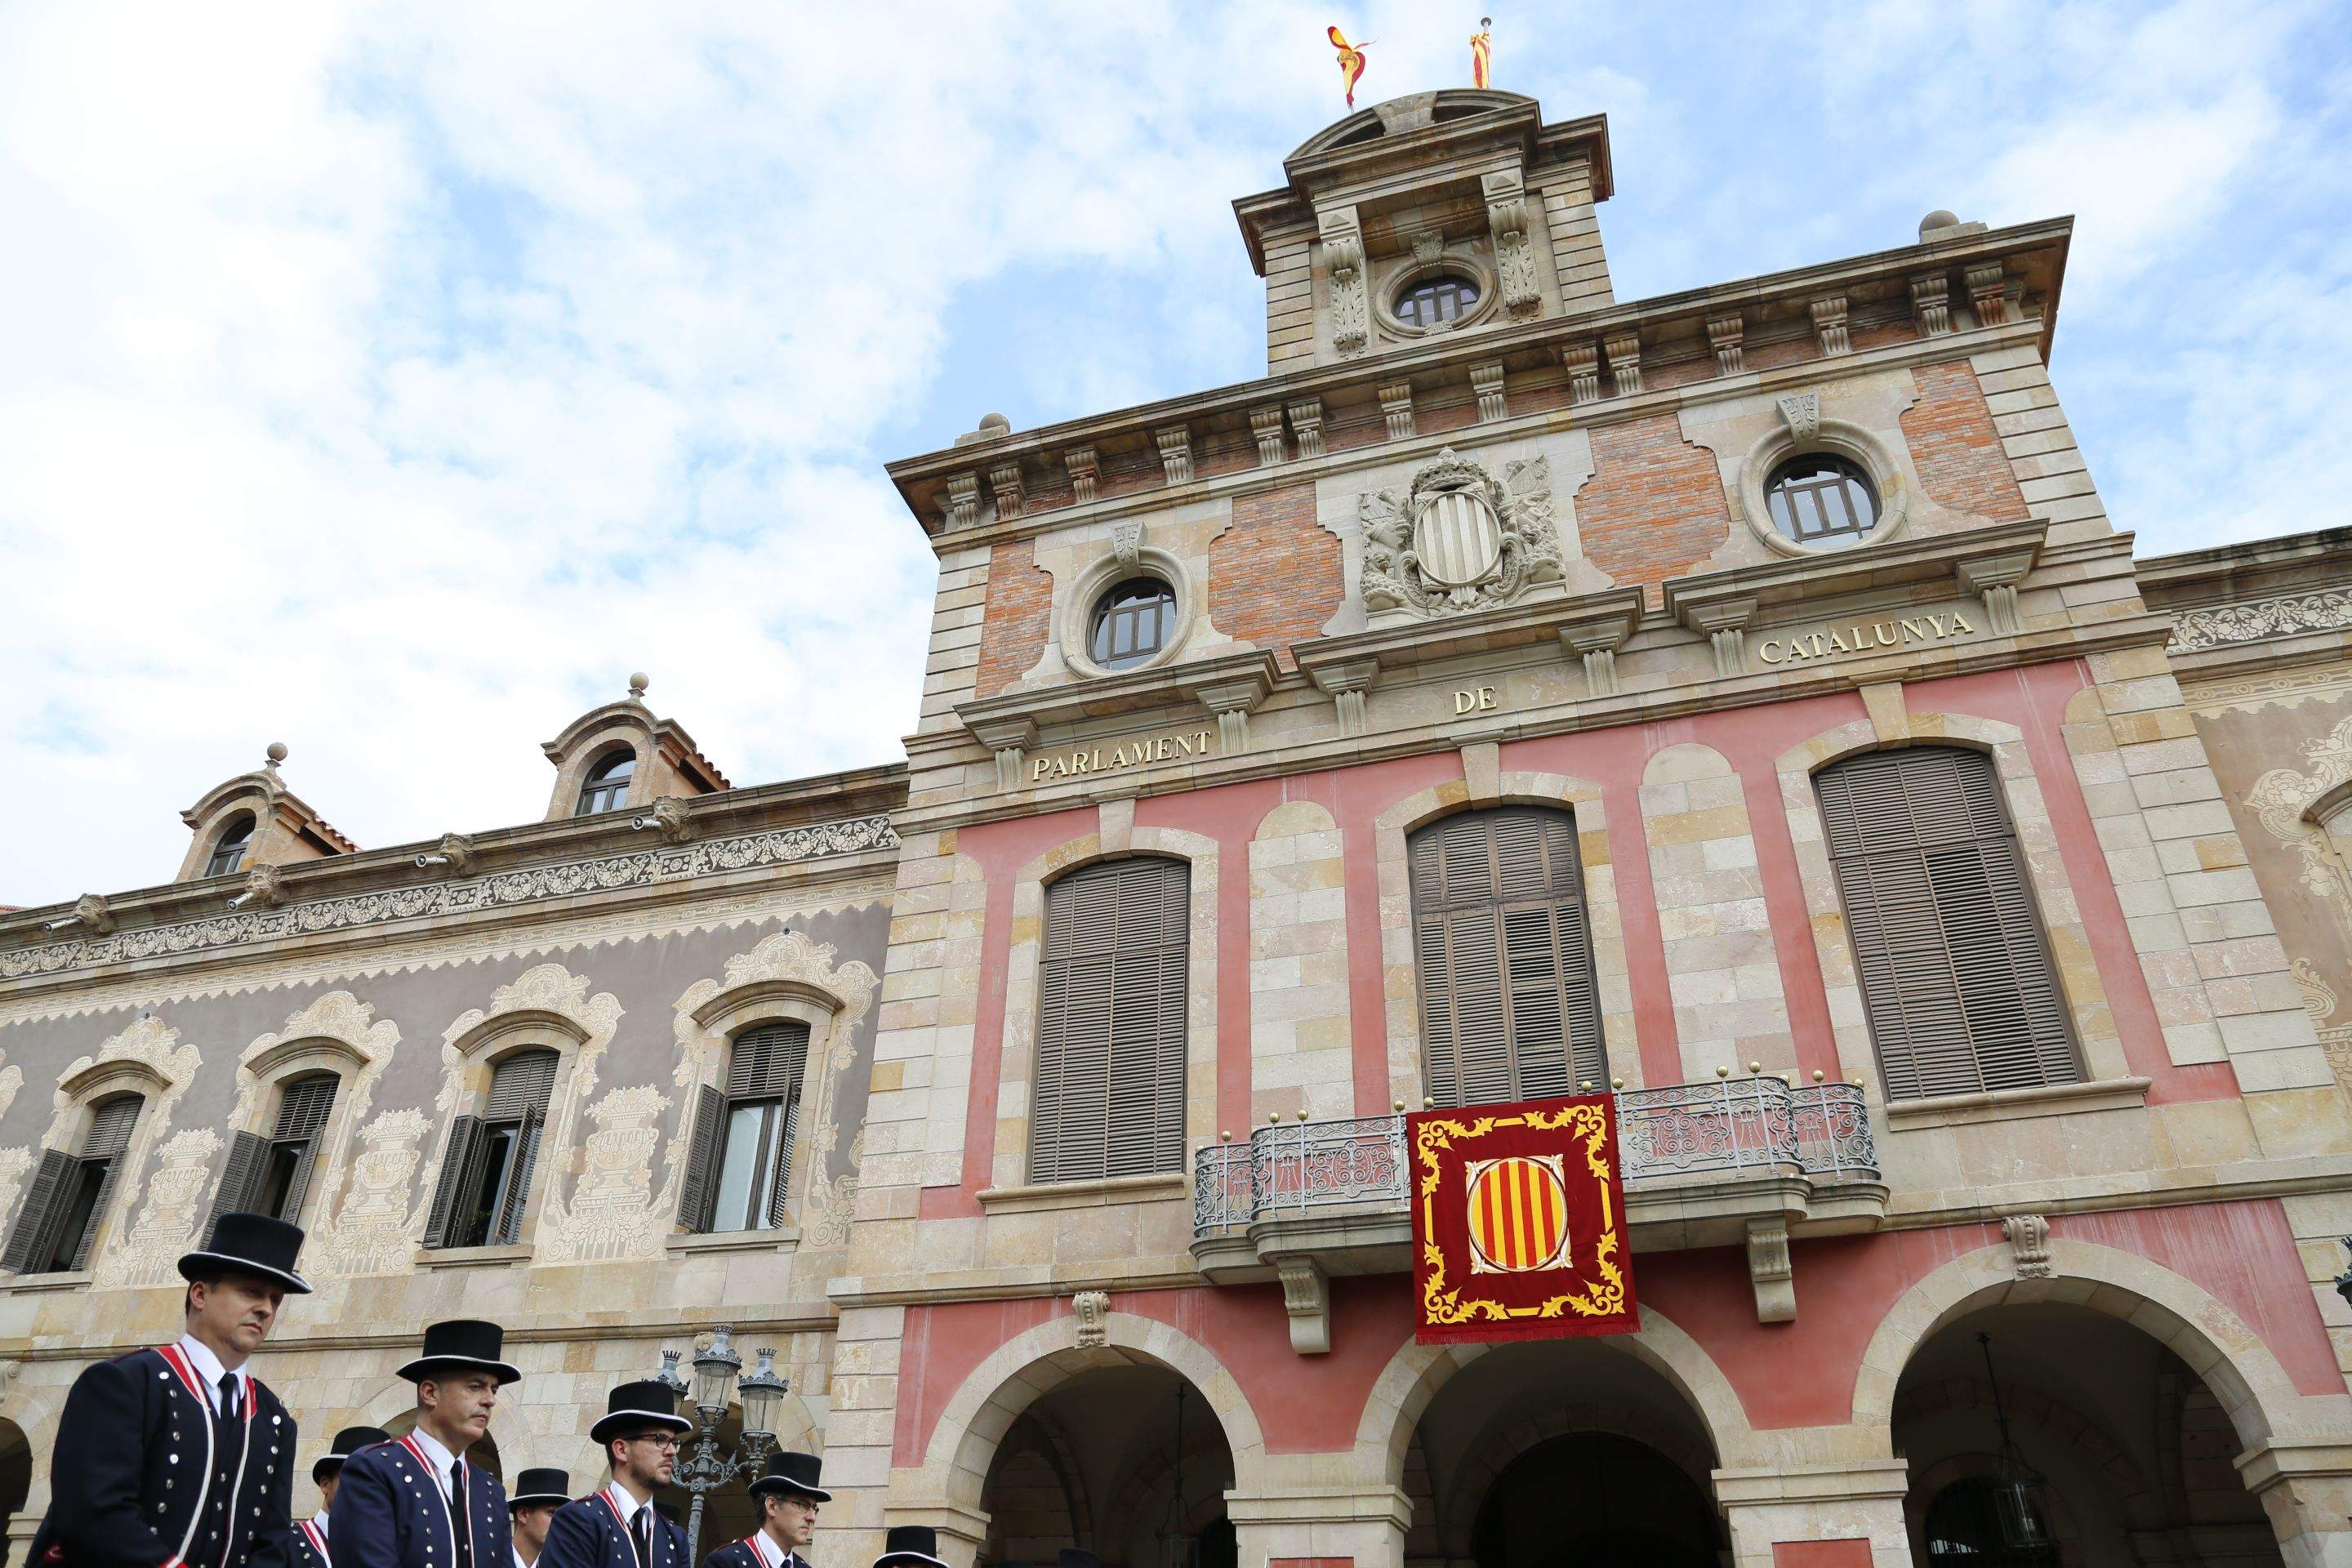 CUP abstention decision leaves Catalan parliament stalled